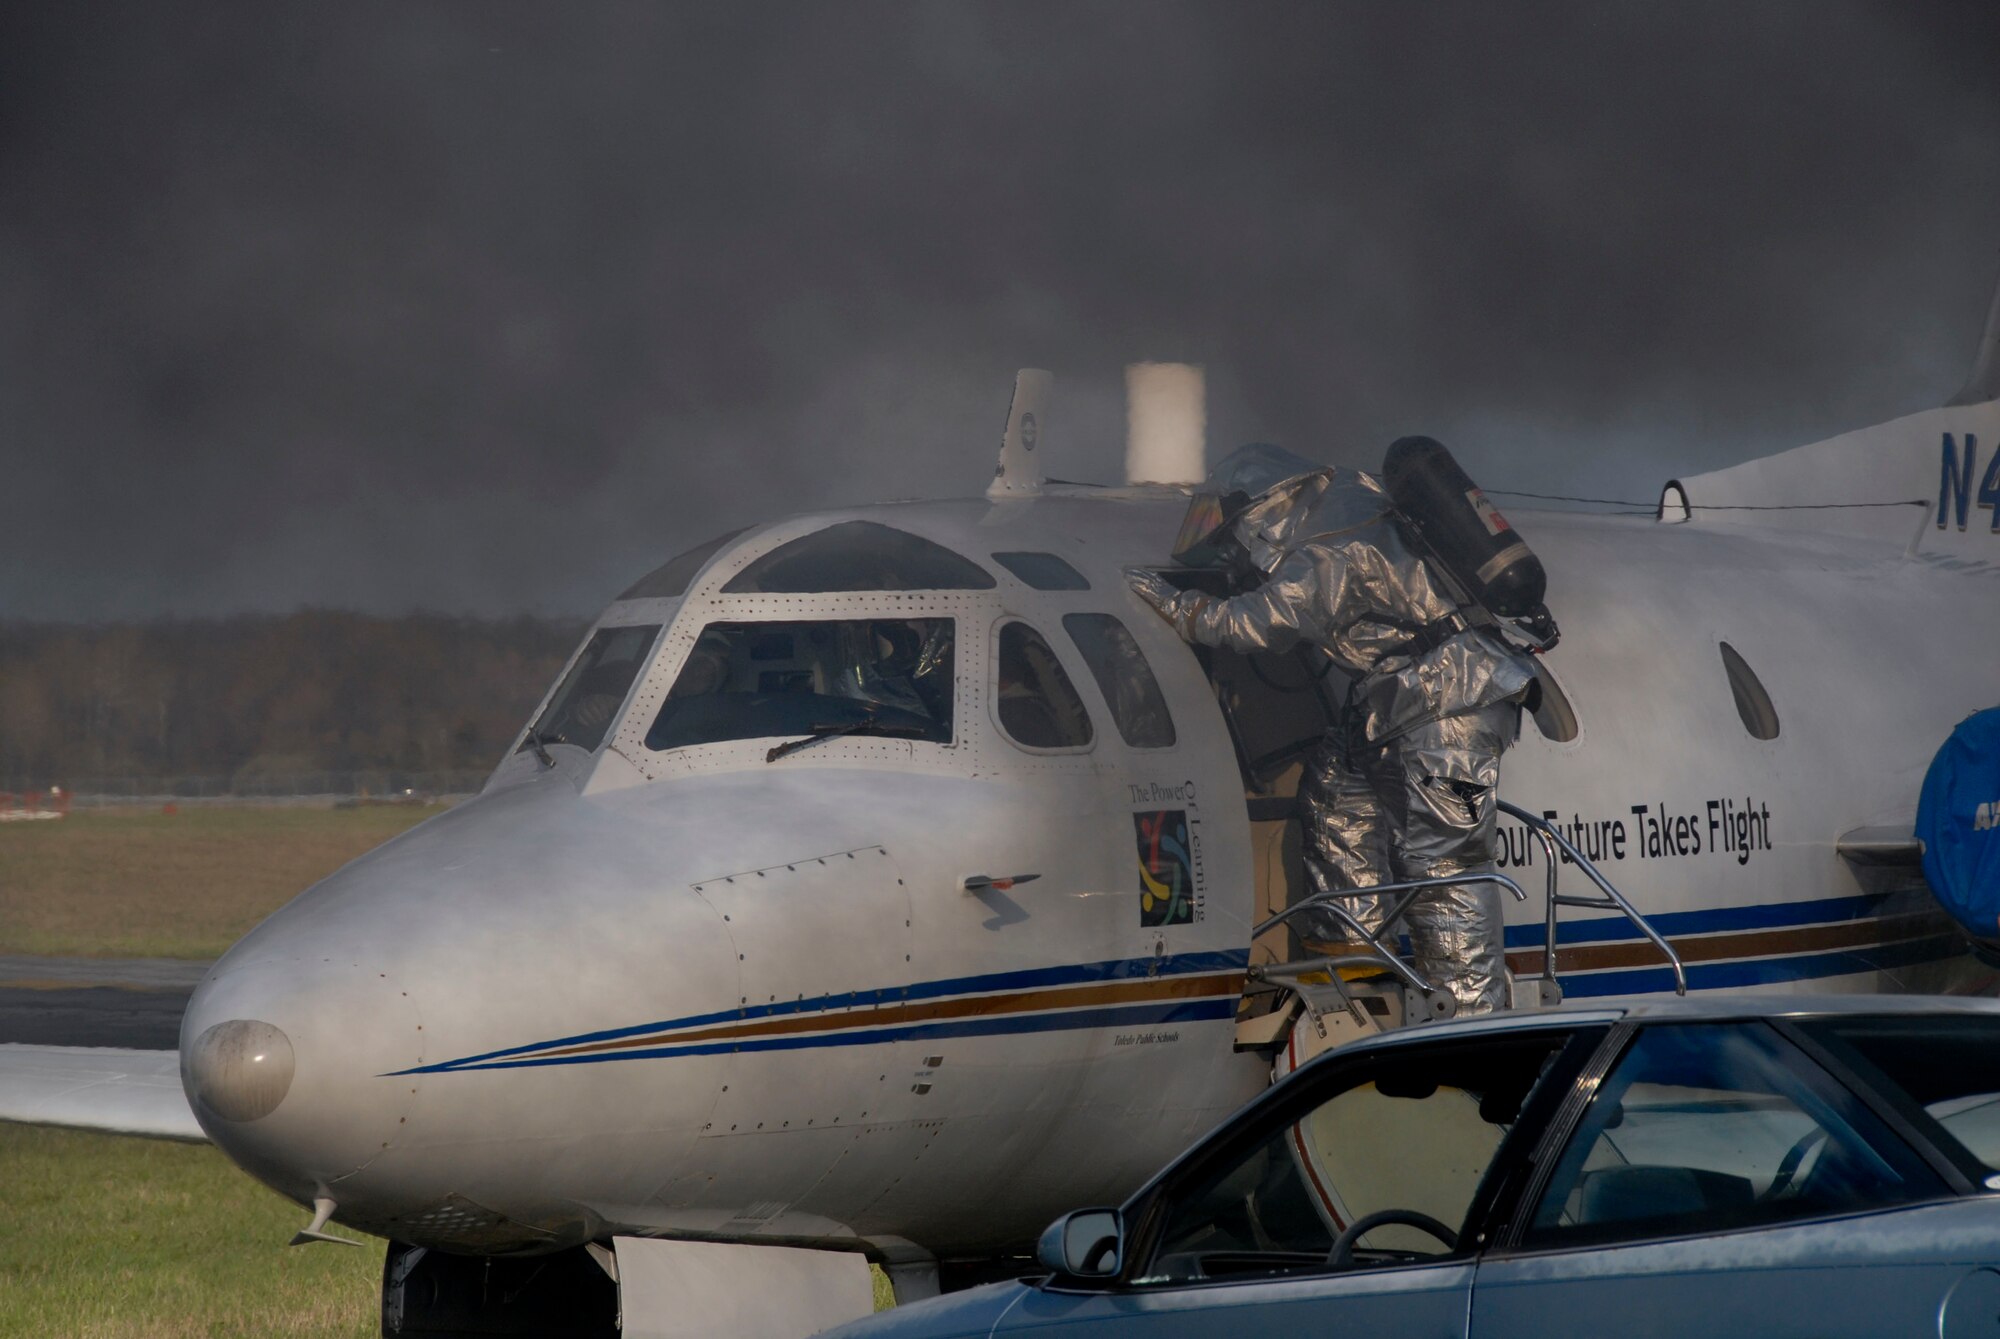 Members of the 180th Fighter Wing fire department participated in an aircraft crash and recovery exercise at the Toledo Express Airport on April 22. The drill, required every three years, not only tests the response of airport authorities, but also the response of other local emergency, fire and rescue crews that would normally respond to such an incident, to include the 180th FW fire department. USAF photo by Tech. Sgt. Beth Holliker (Released)